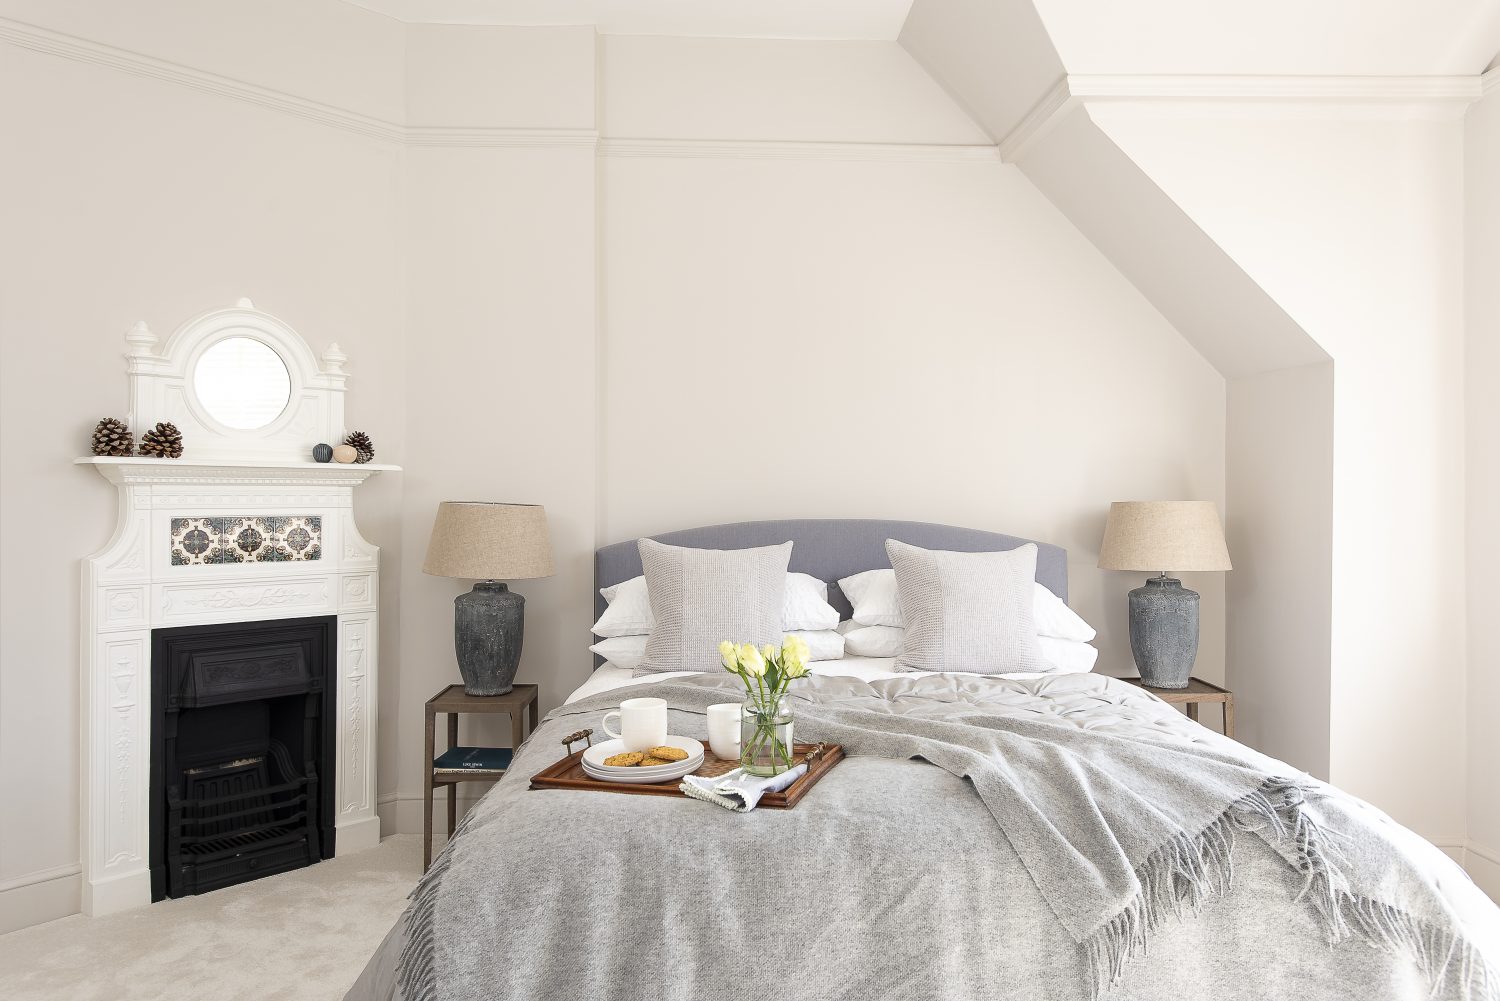 Slate grey bedside lamps from Mark Maynard complement the chair in this relaxing guest bedroom